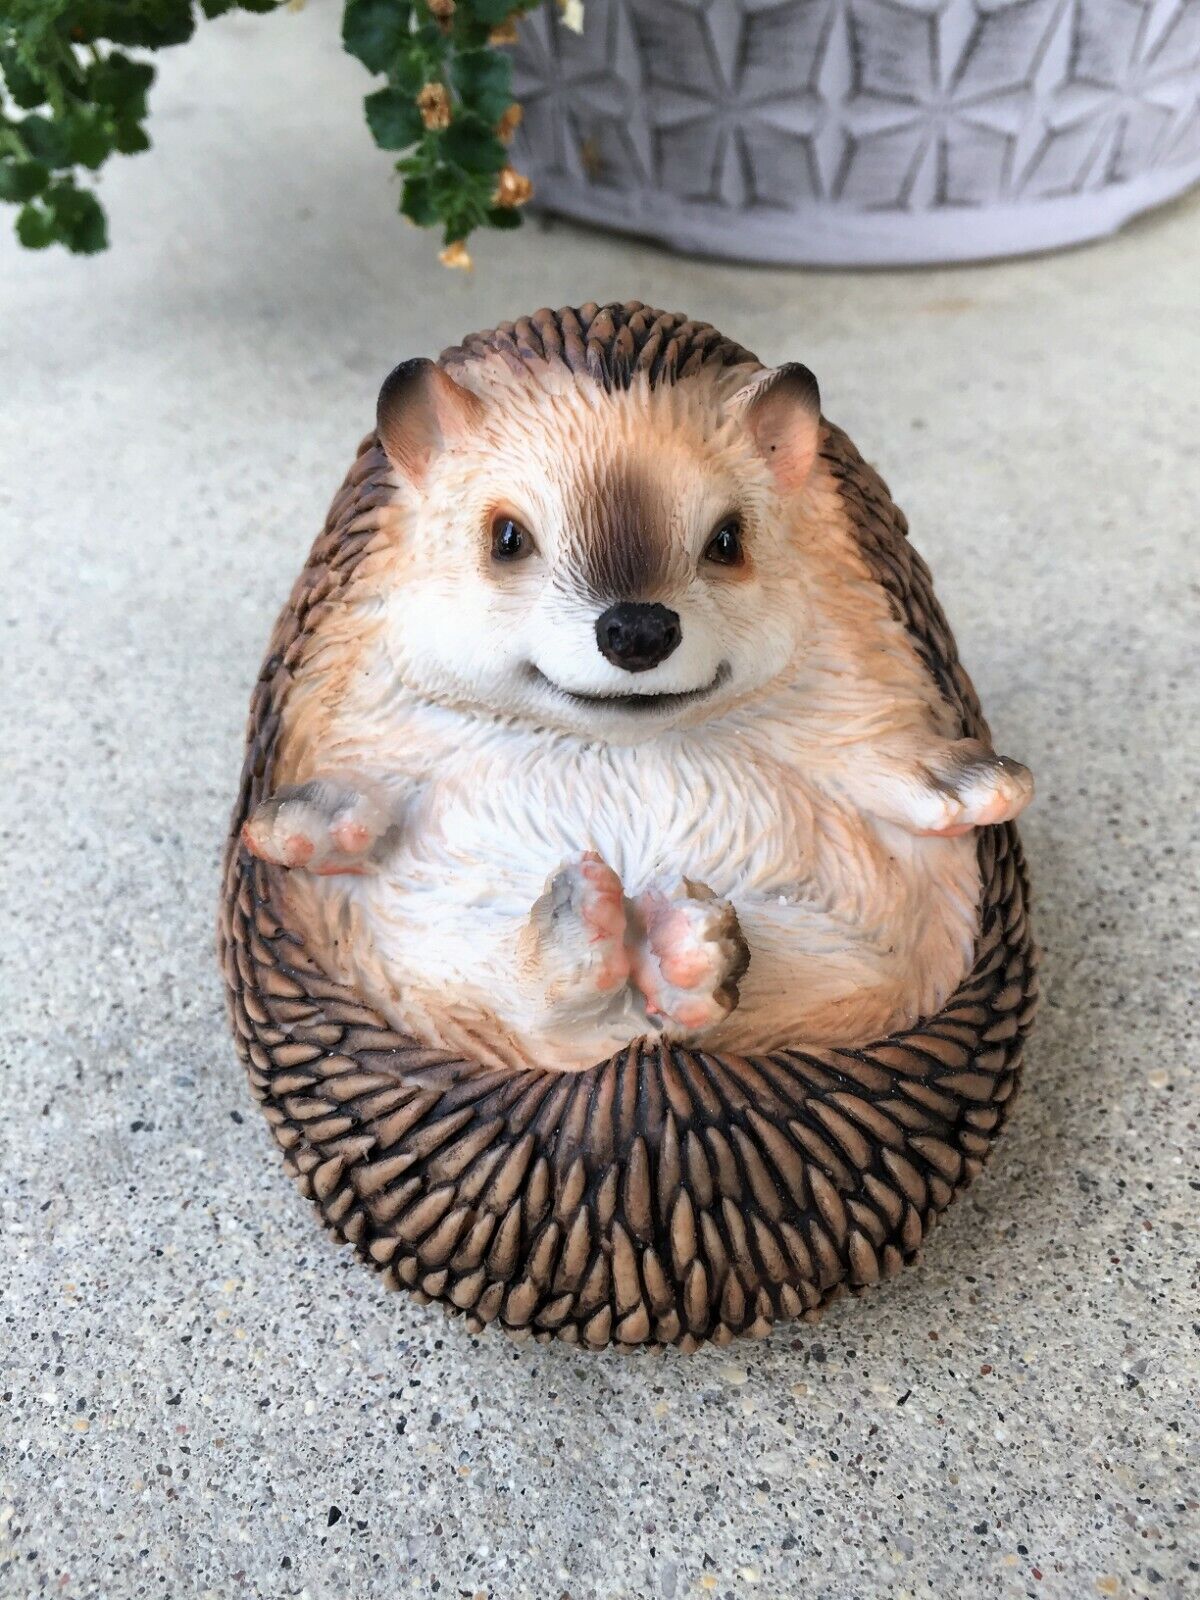 Hedgehog Figurine Resin Animal Statue Countryside Cute Curled Up in Ball New 